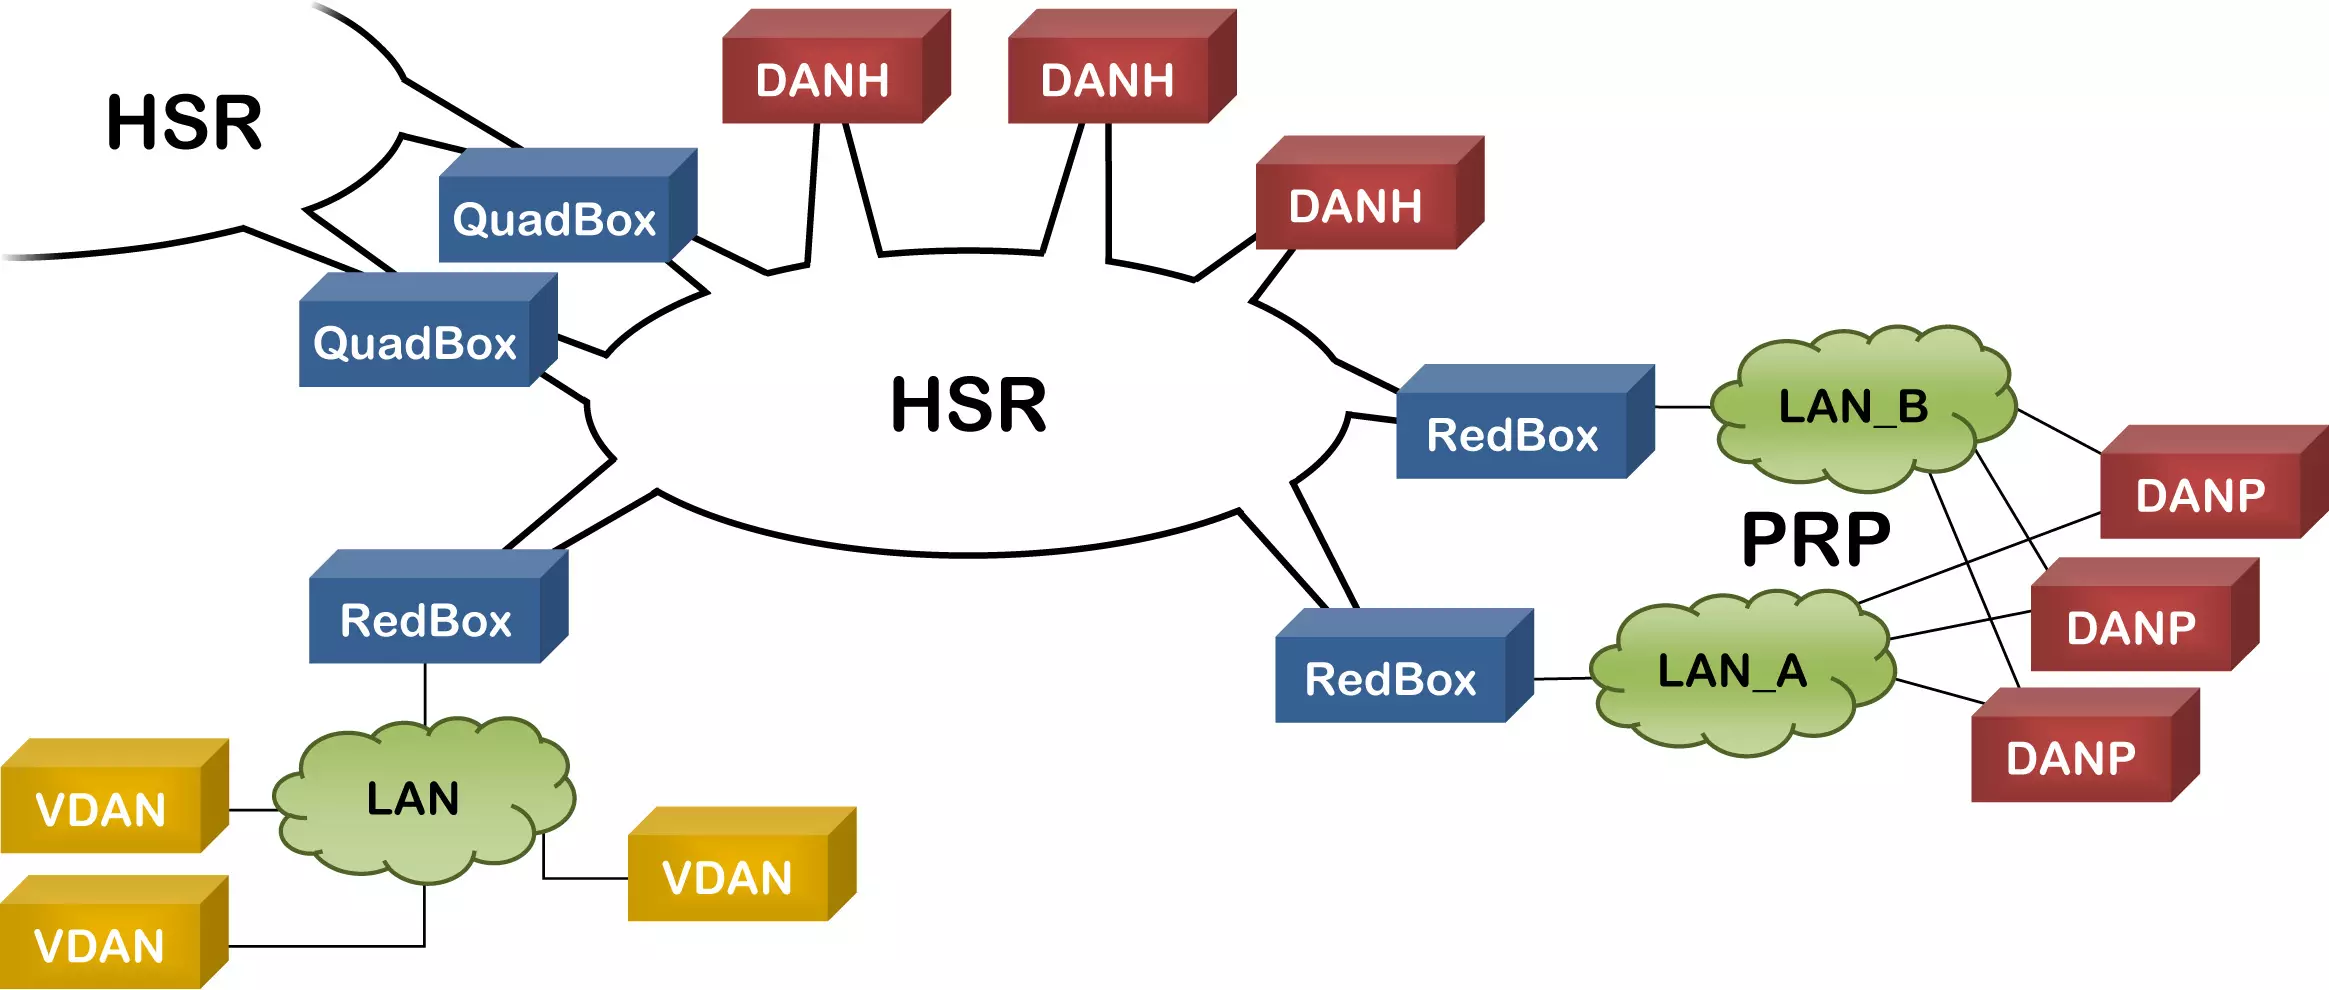 The concept of HSR